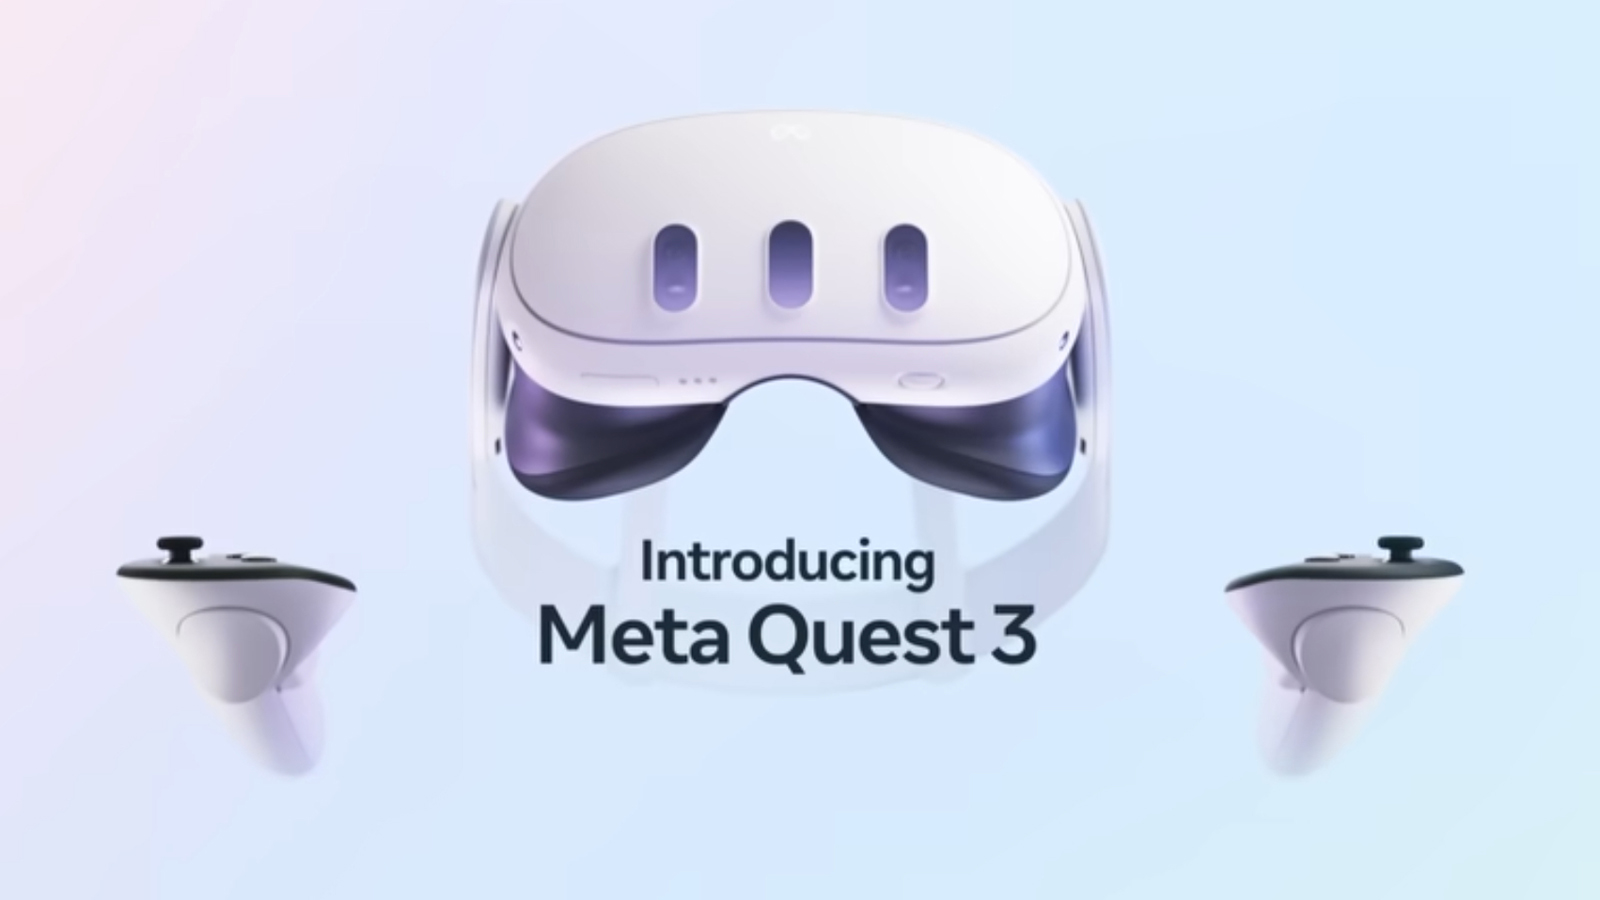 Meta reveals the new Quest 3 VR headset with a $499.99 price tag